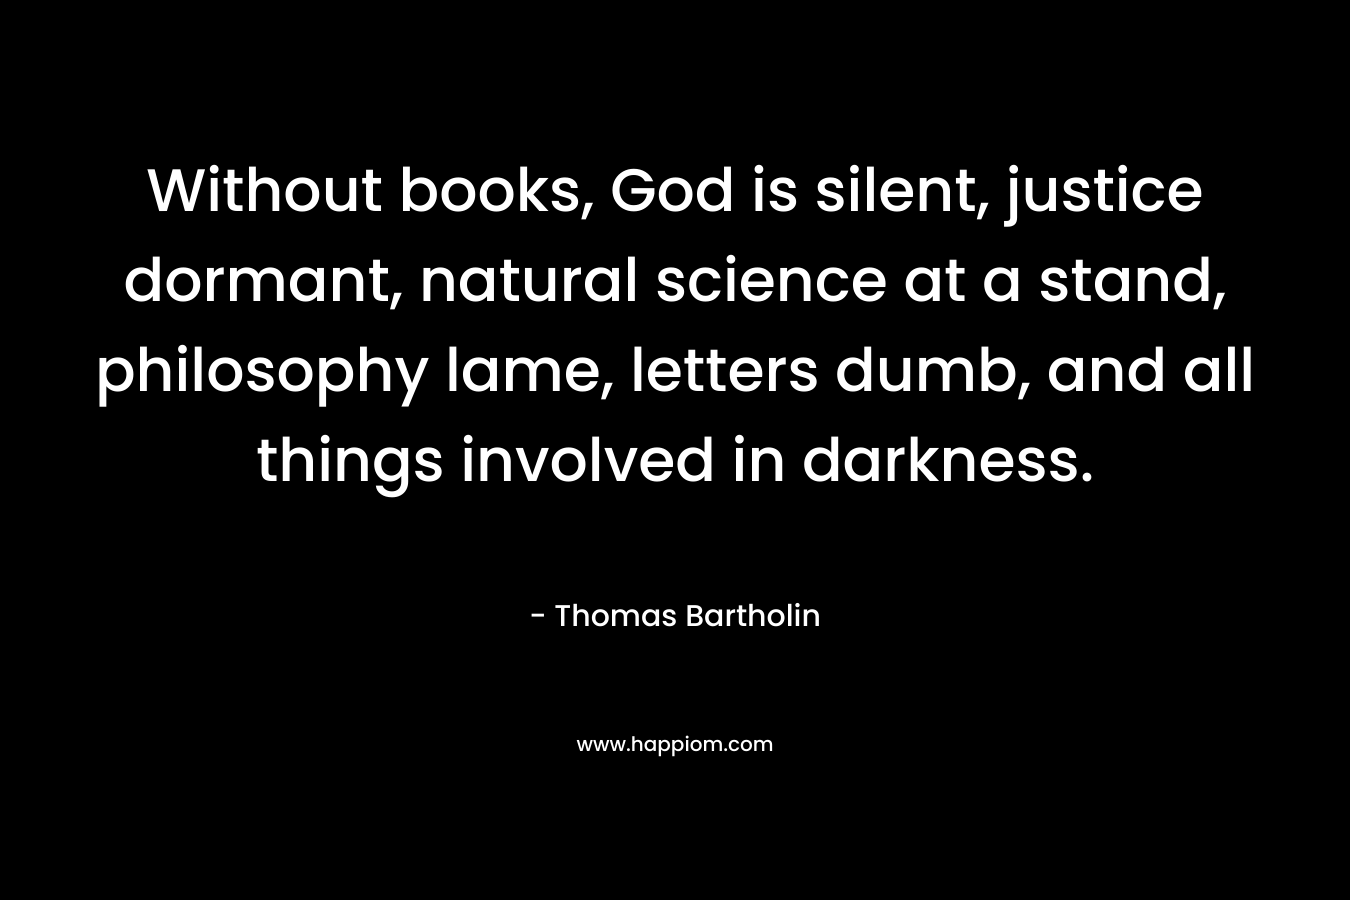 Without books, God is silent, justice dormant, natural science at a stand, philosophy lame, letters dumb, and all things involved in darkness. – Thomas Bartholin